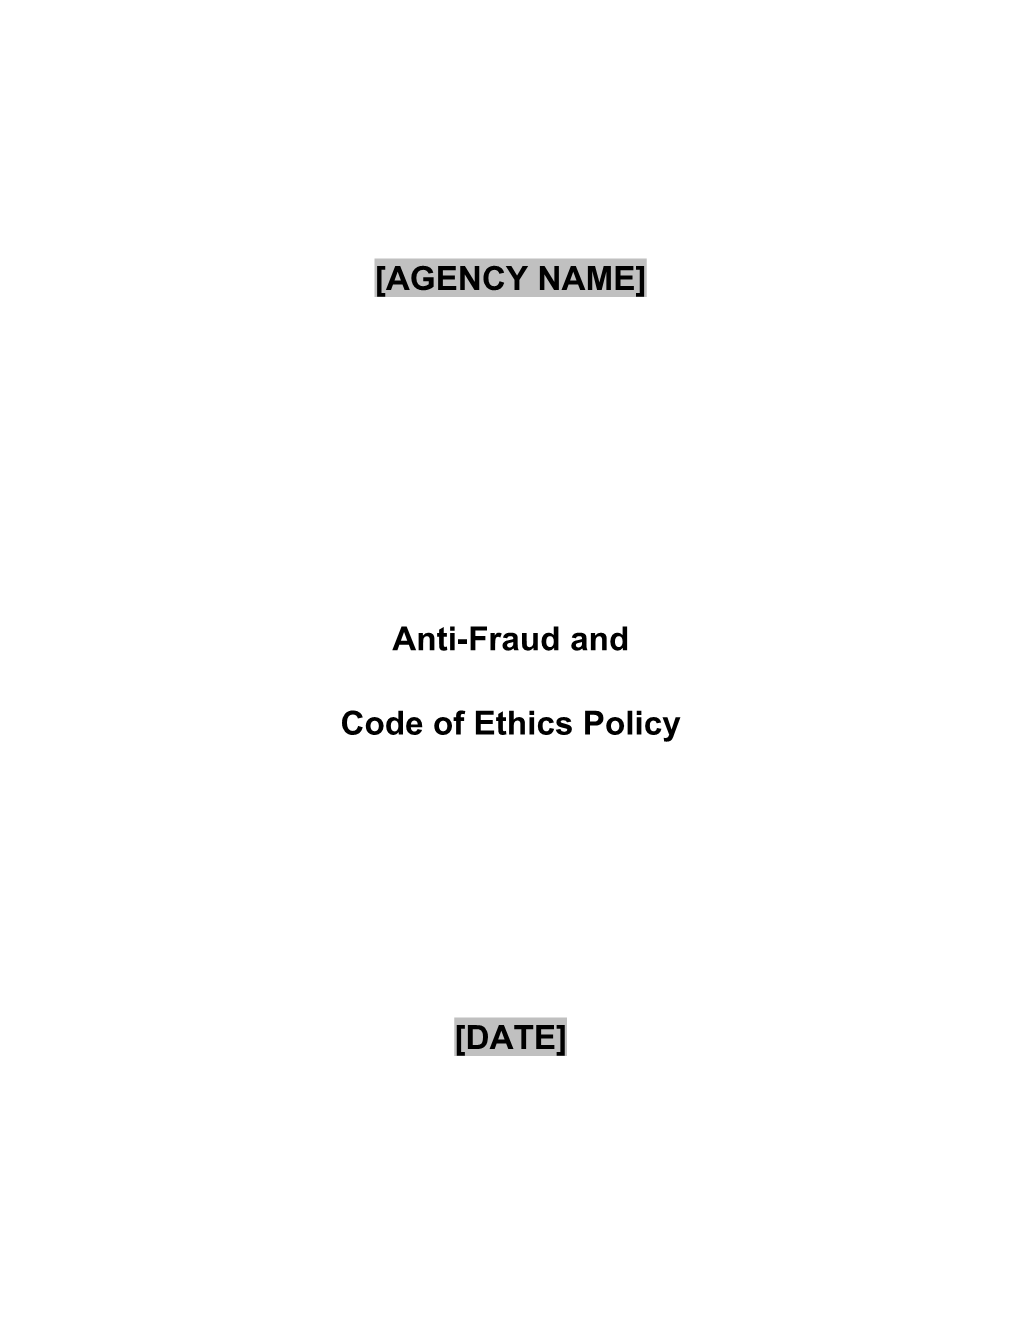 Anti-Fraud and Code of Ethics Policy